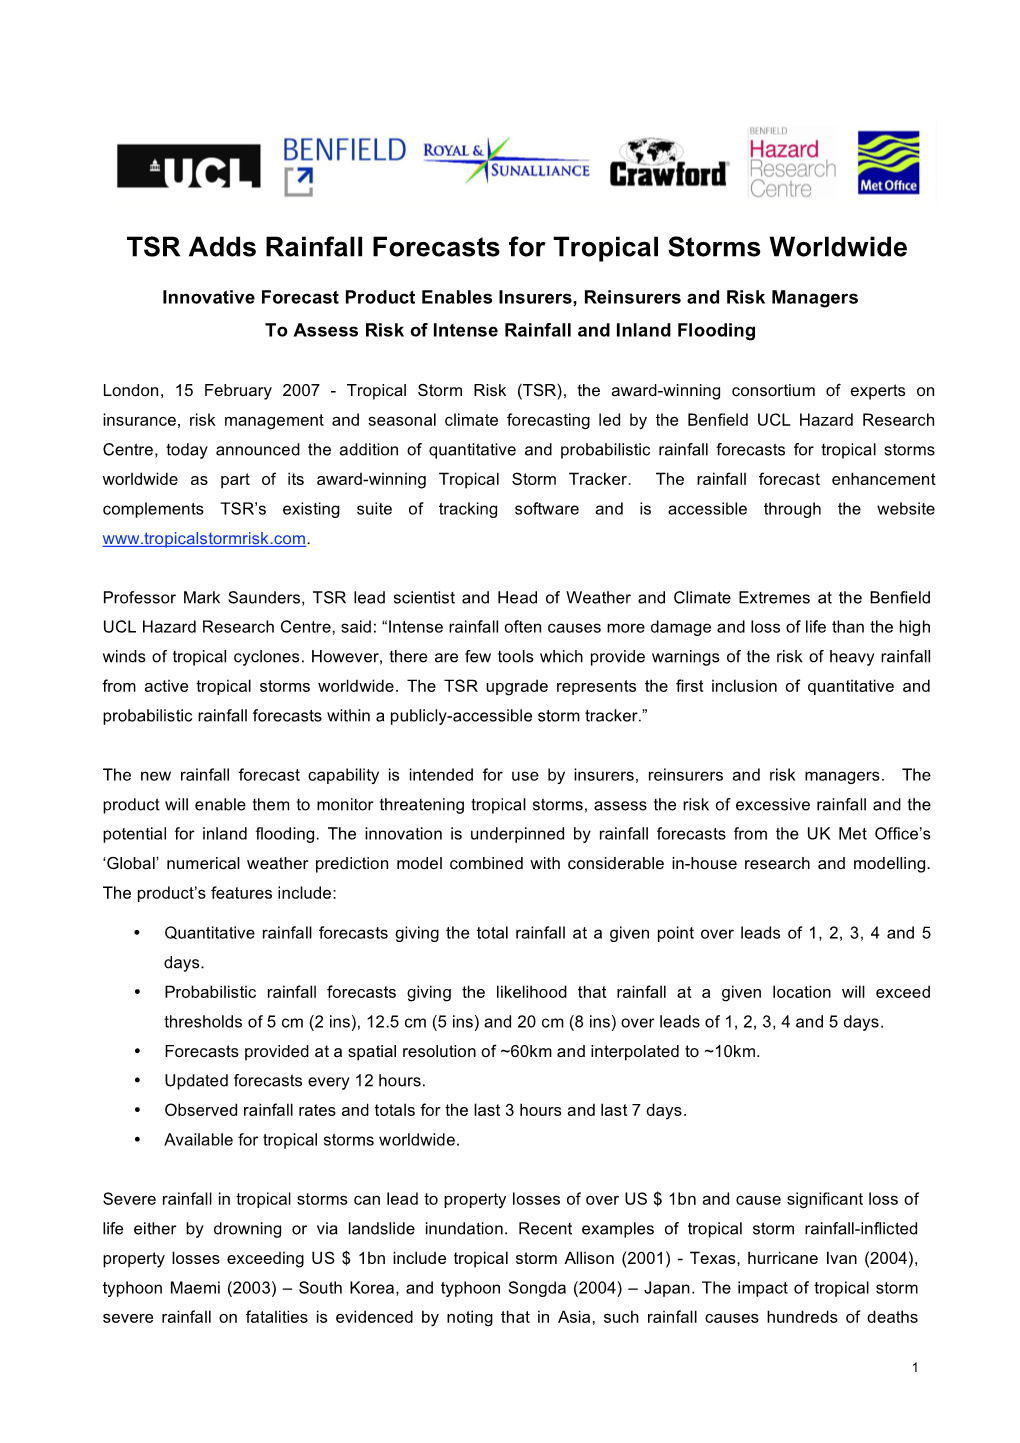 TSR Adds Rainfall Forecasts for Tropical Storms Worldwide